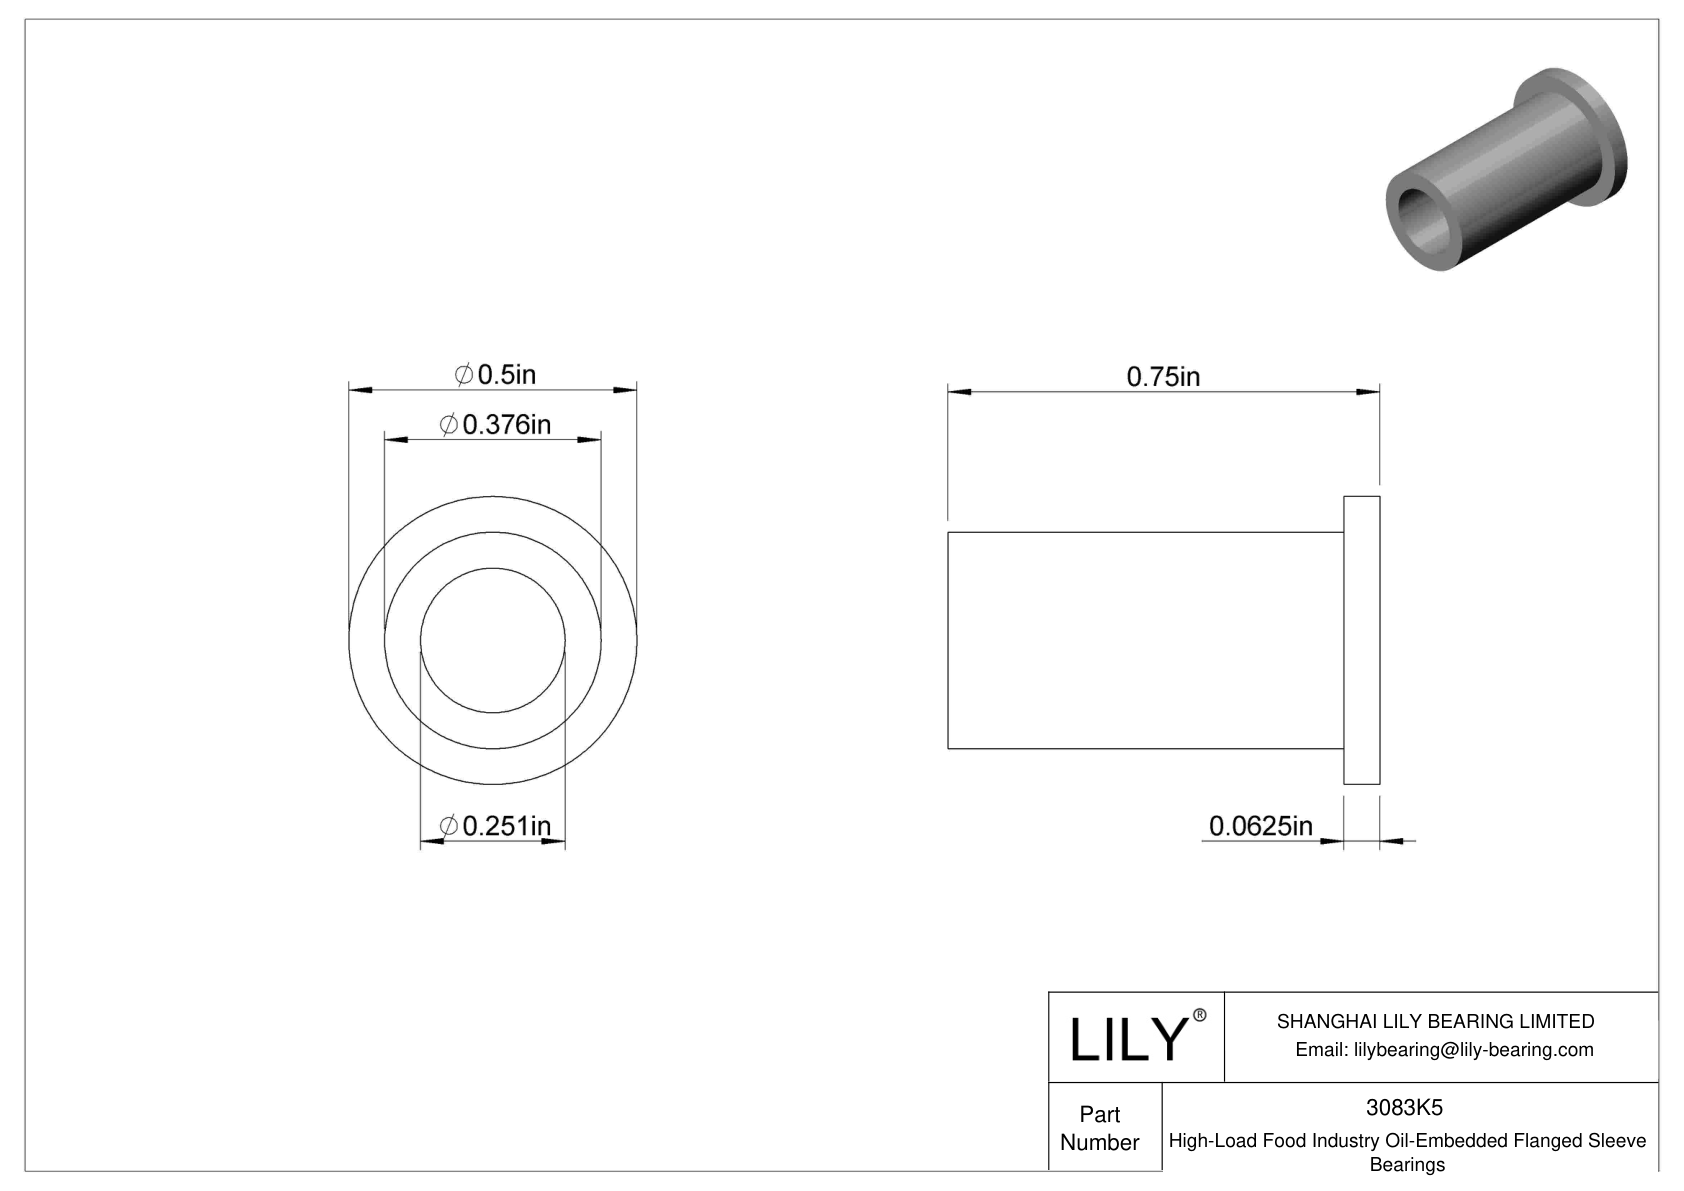 DAIDKF High-Load Food Industry Oil-Embedded Flanged Sleeve Bearings cad drawing